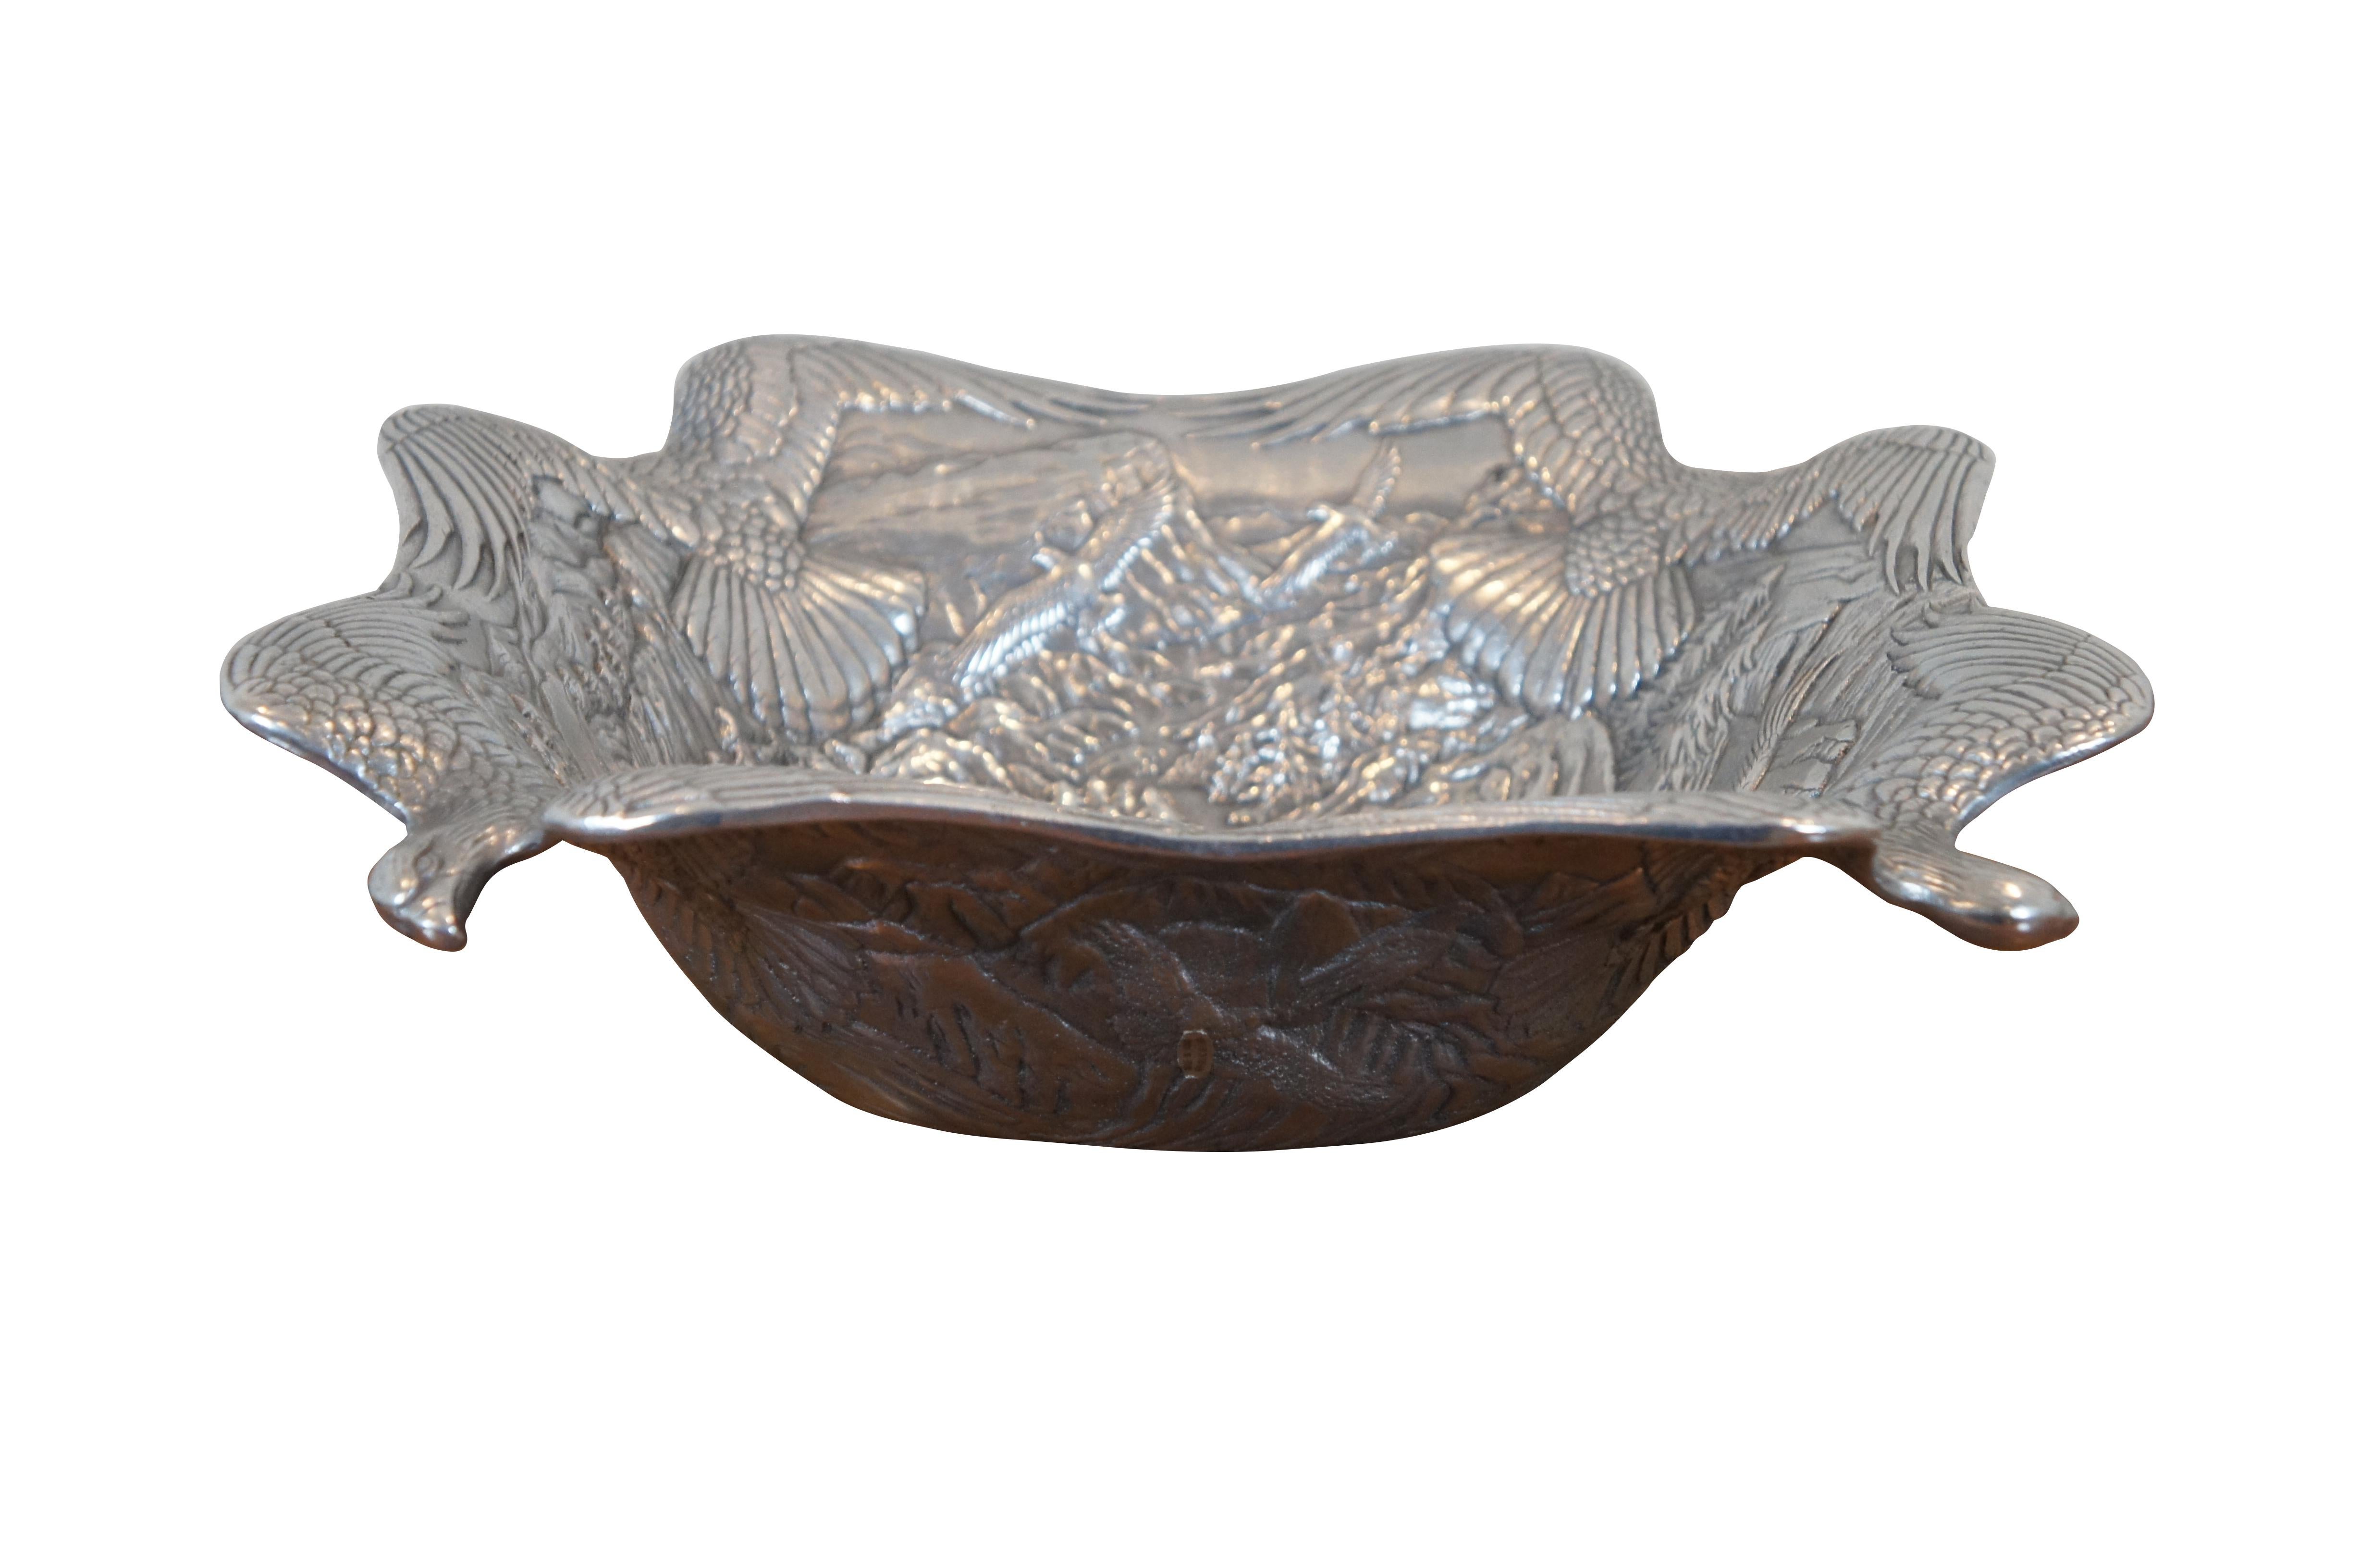 Rare vintage 1992 Arthur Court centerpiece bowl.  Made of aluminum featuring low relief detail of bald eagles soaring / hunting against the mountain landscape.  

Dimensions:
13.25” x 4” (Diameter x Height)